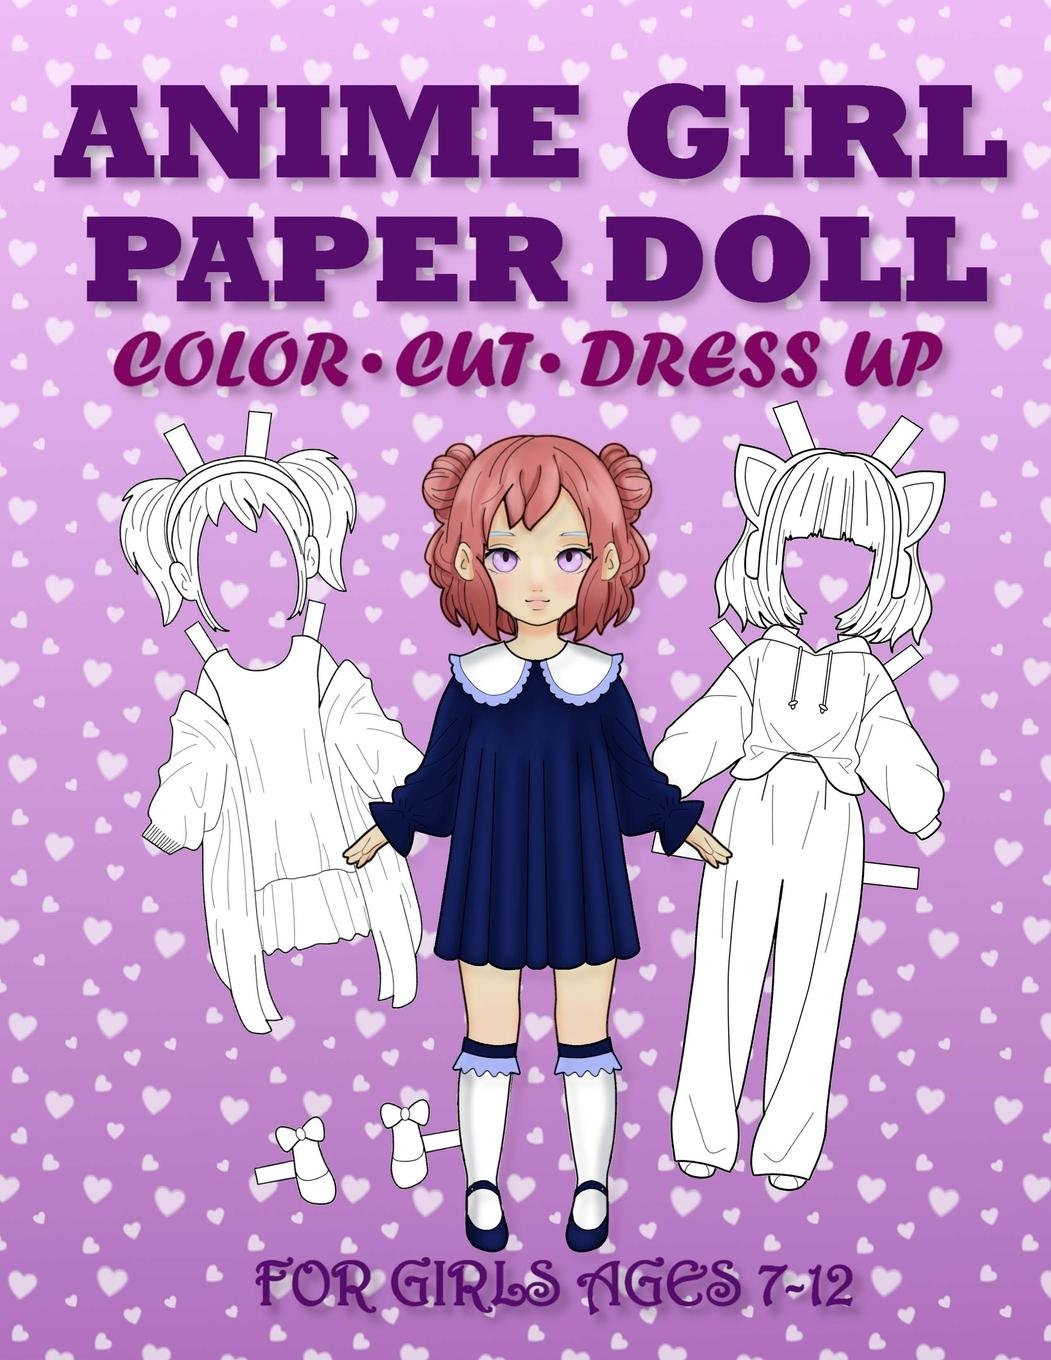 Book Anime Girl Paper Doll for Girls Ages 7-12 